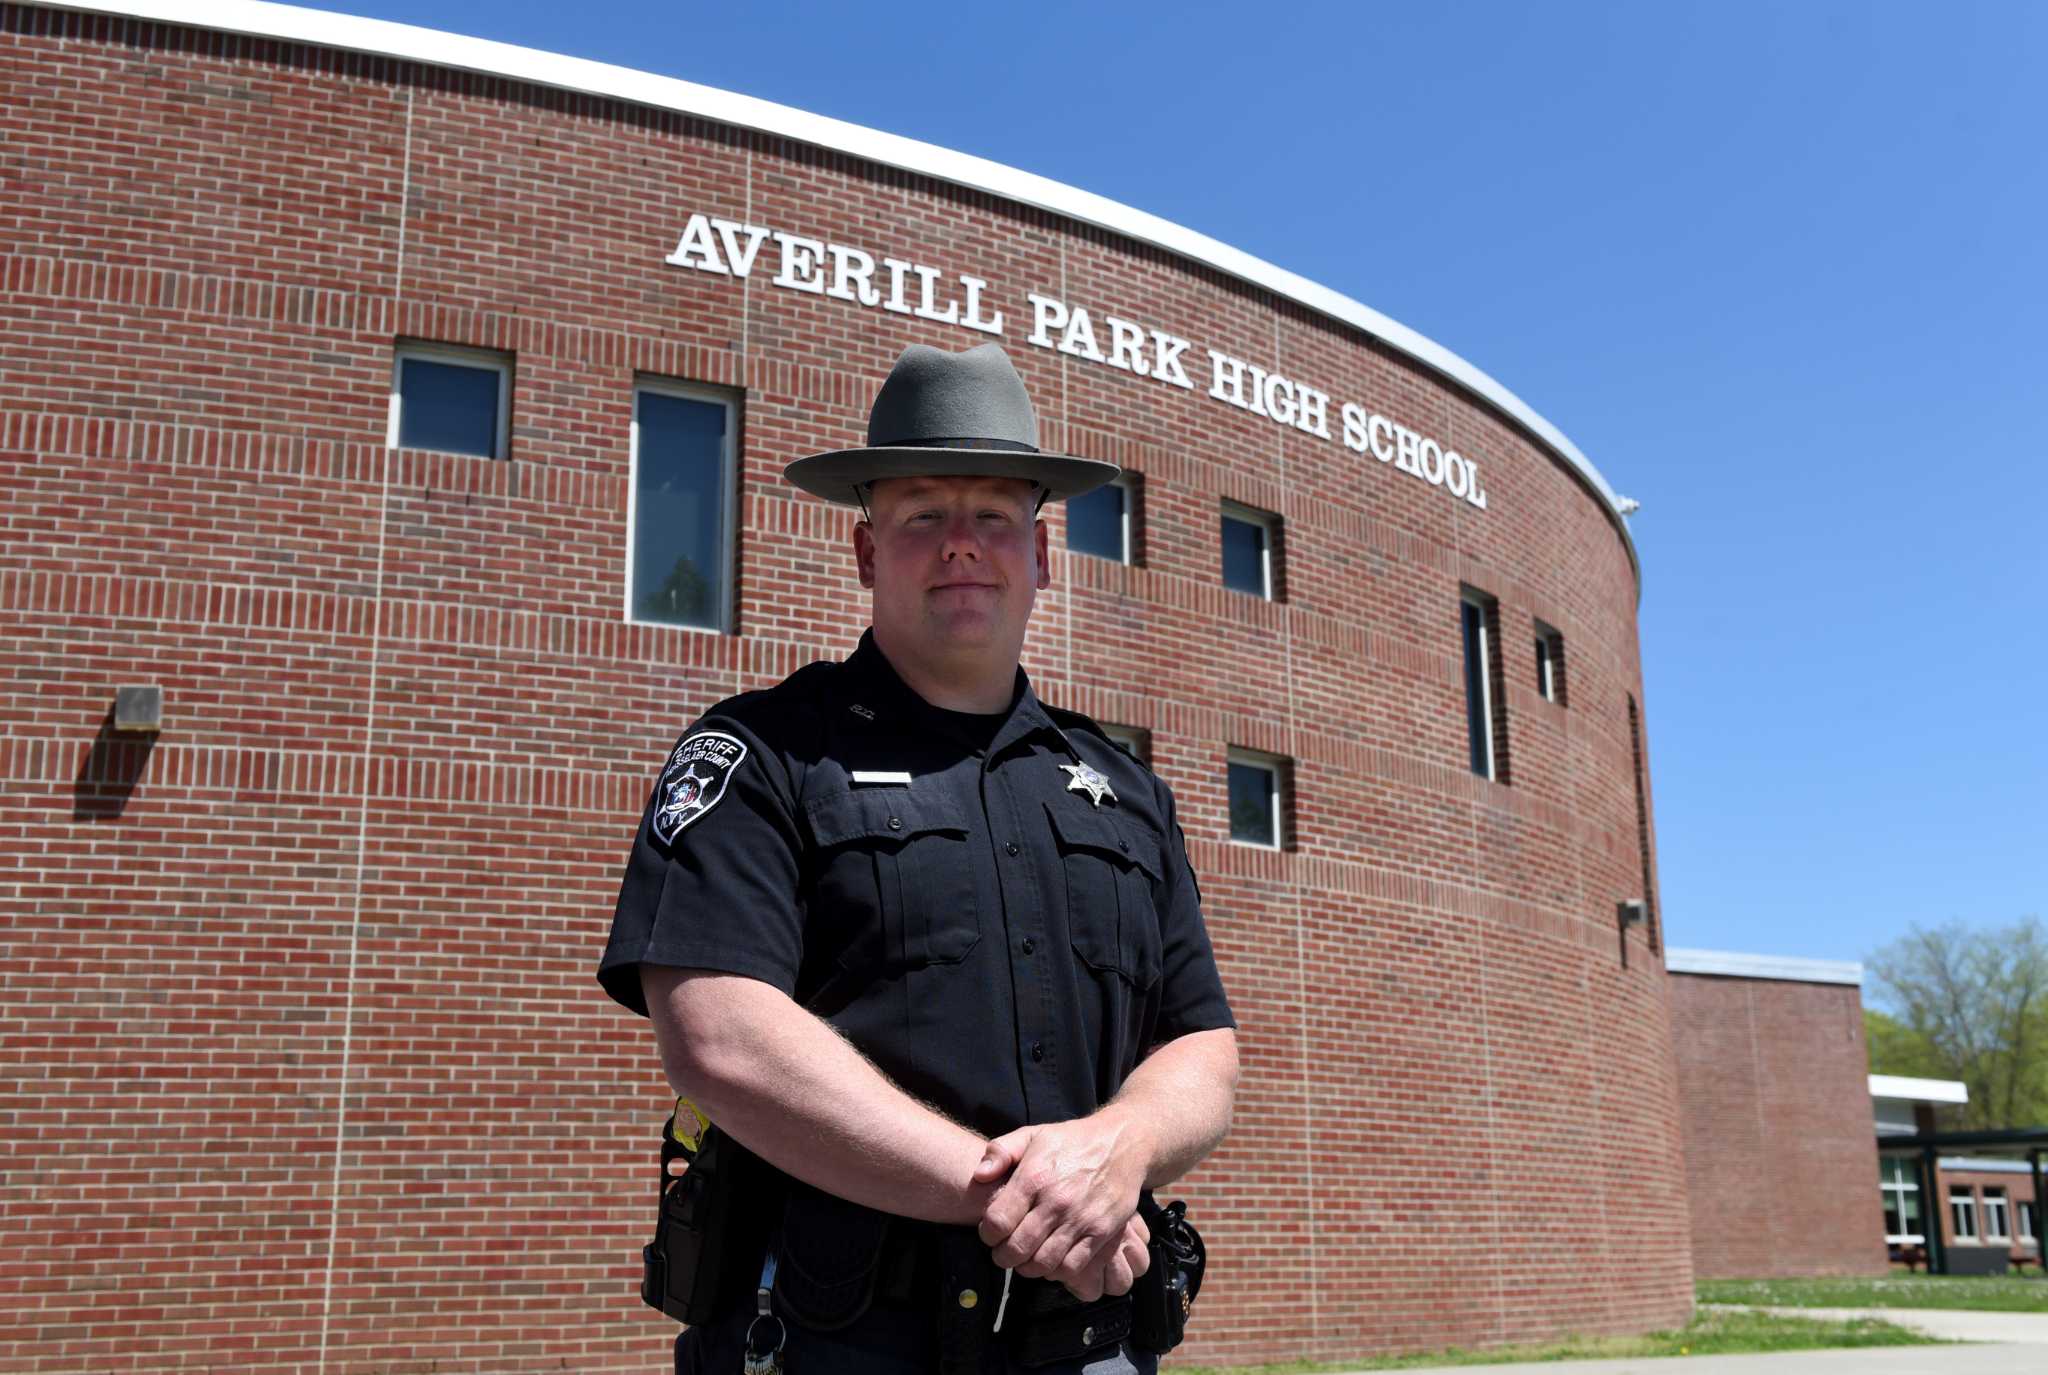 Everyday Heroes of COVID-19: Brian Nikles, school resource officer in Averill Park